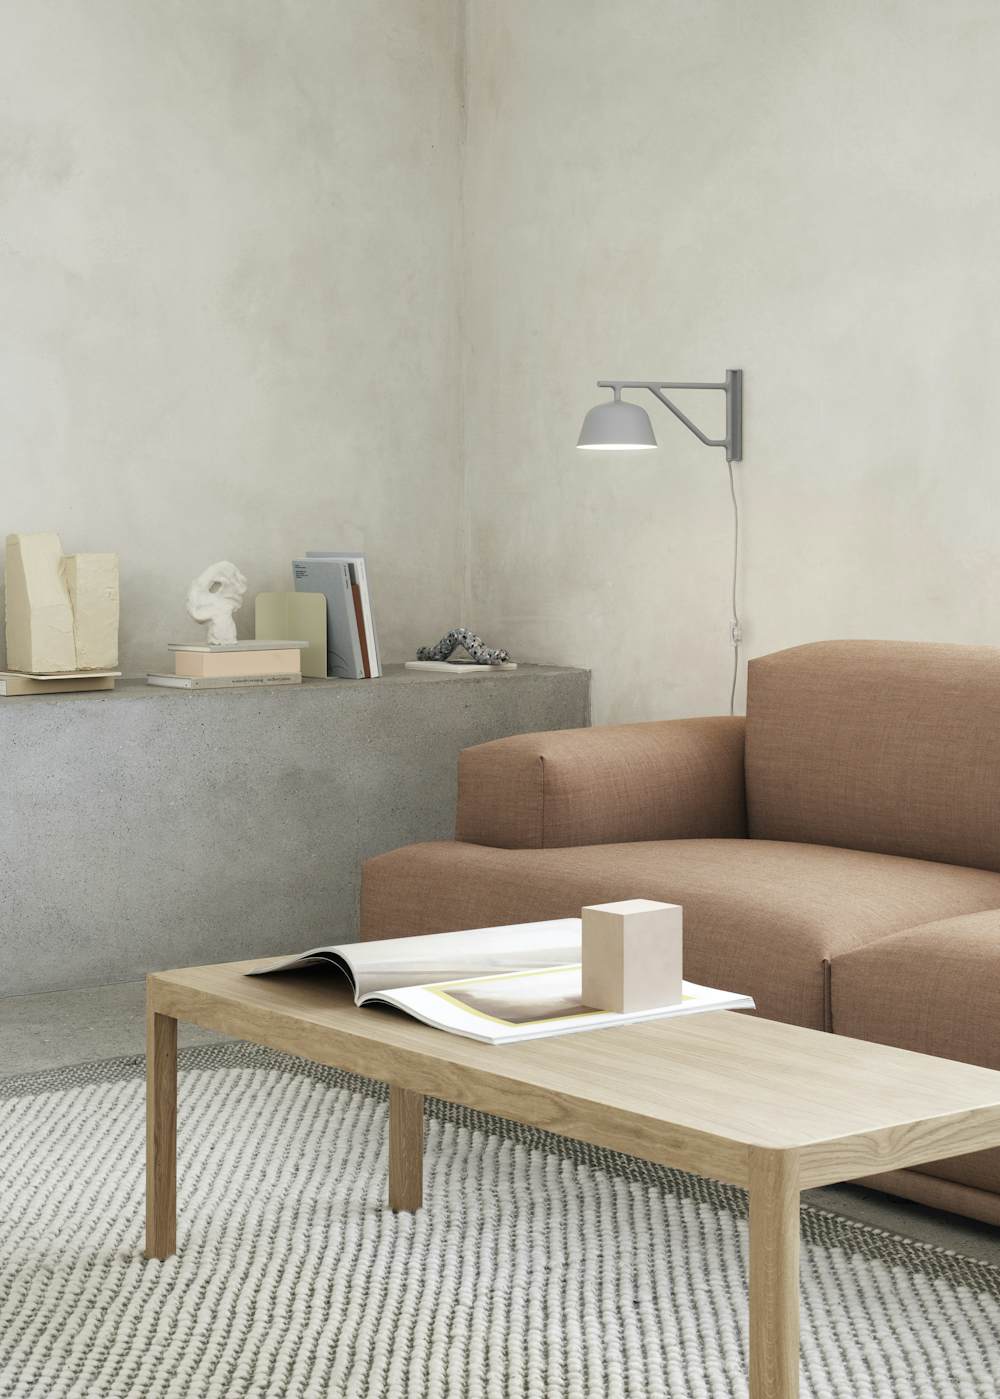 Ambit Wall Lamp above a In Situ Sofa and Workshop Coffee Table in a living room setting